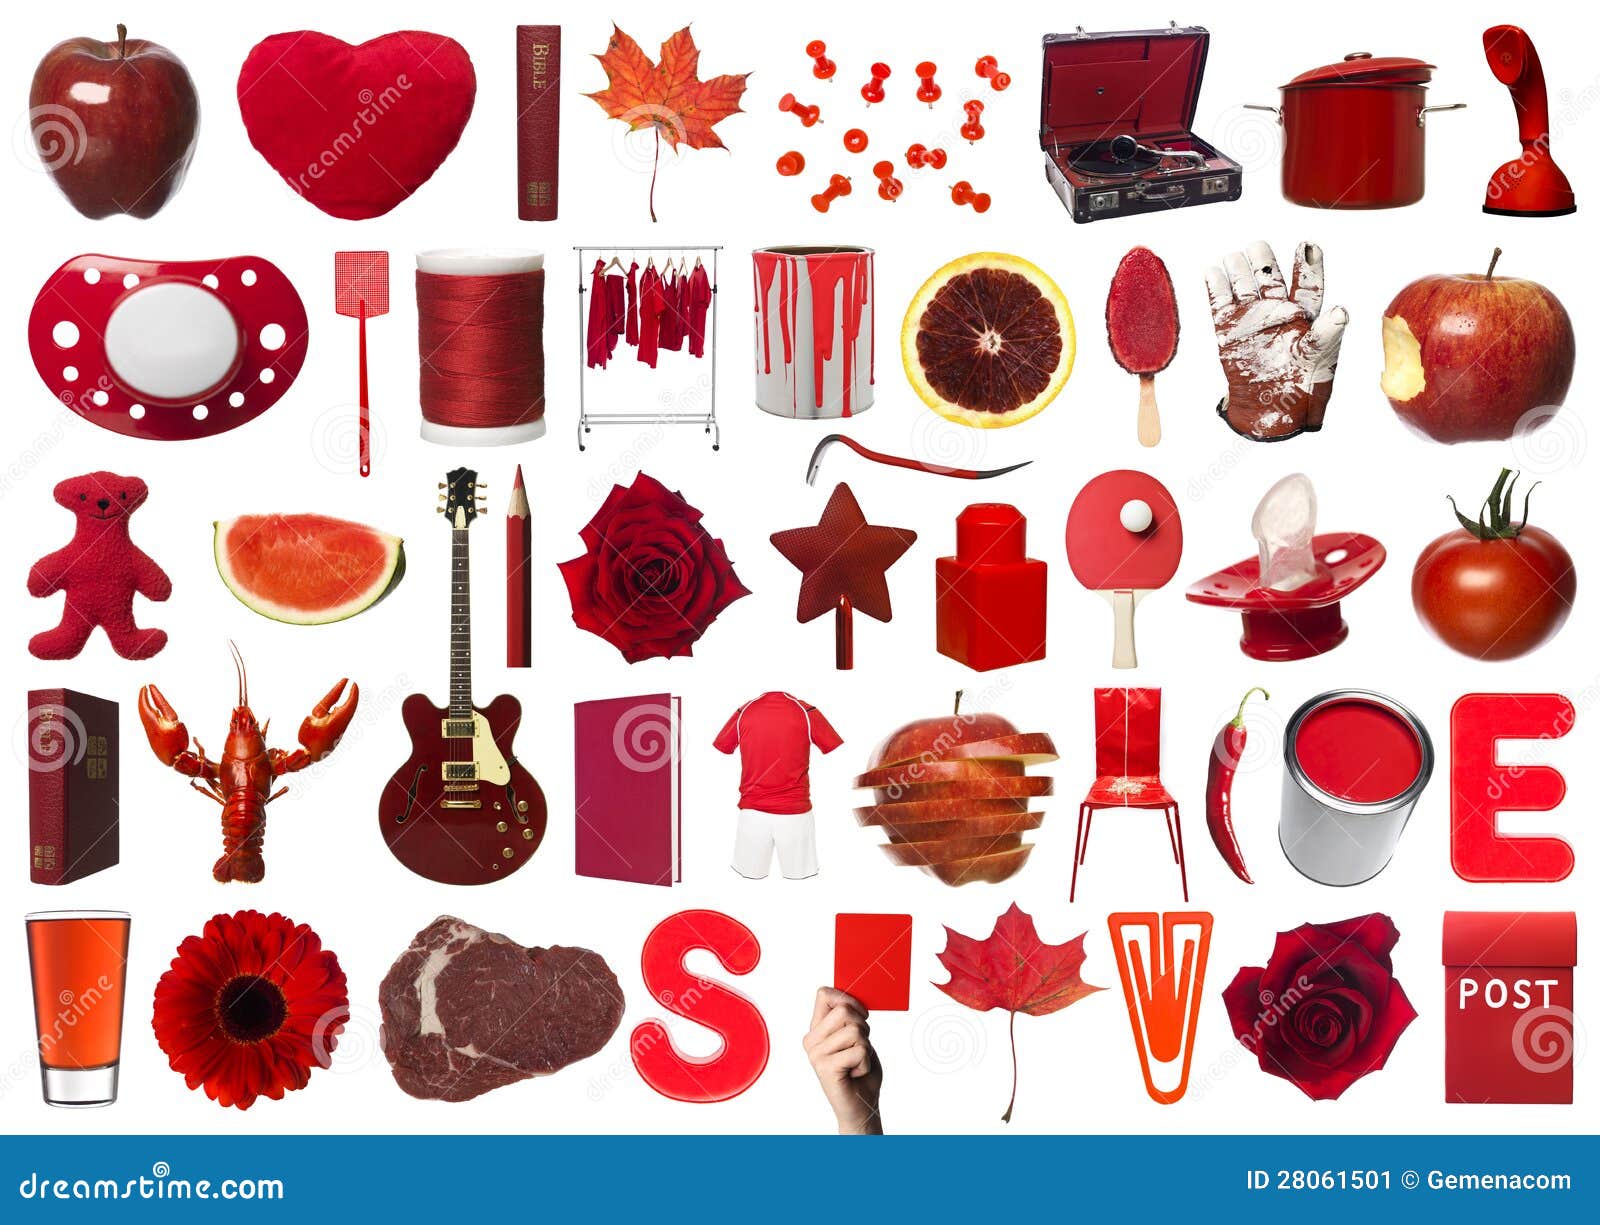 collage-red-objects-28061501.jpg